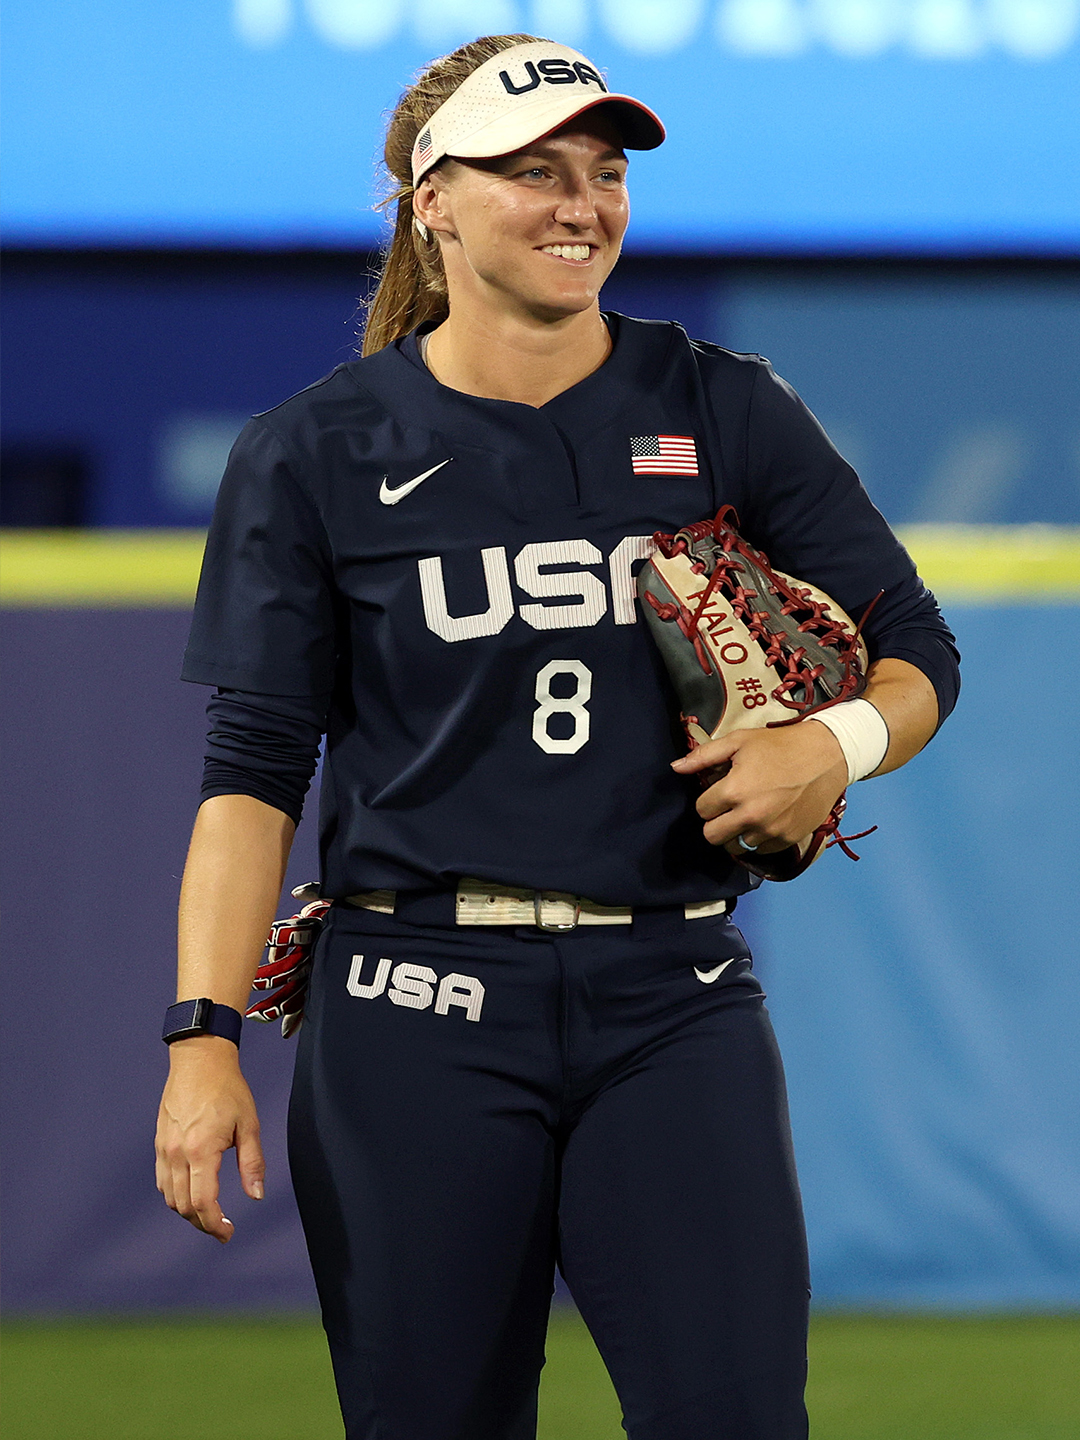 Alabama Softball Haylie Mccleney And Montana Fouts Selected For 22 Usa Softball Women S National Team Roster T Co Ukyveycnol Rolltide T Co Xbgeshyxel Twitter